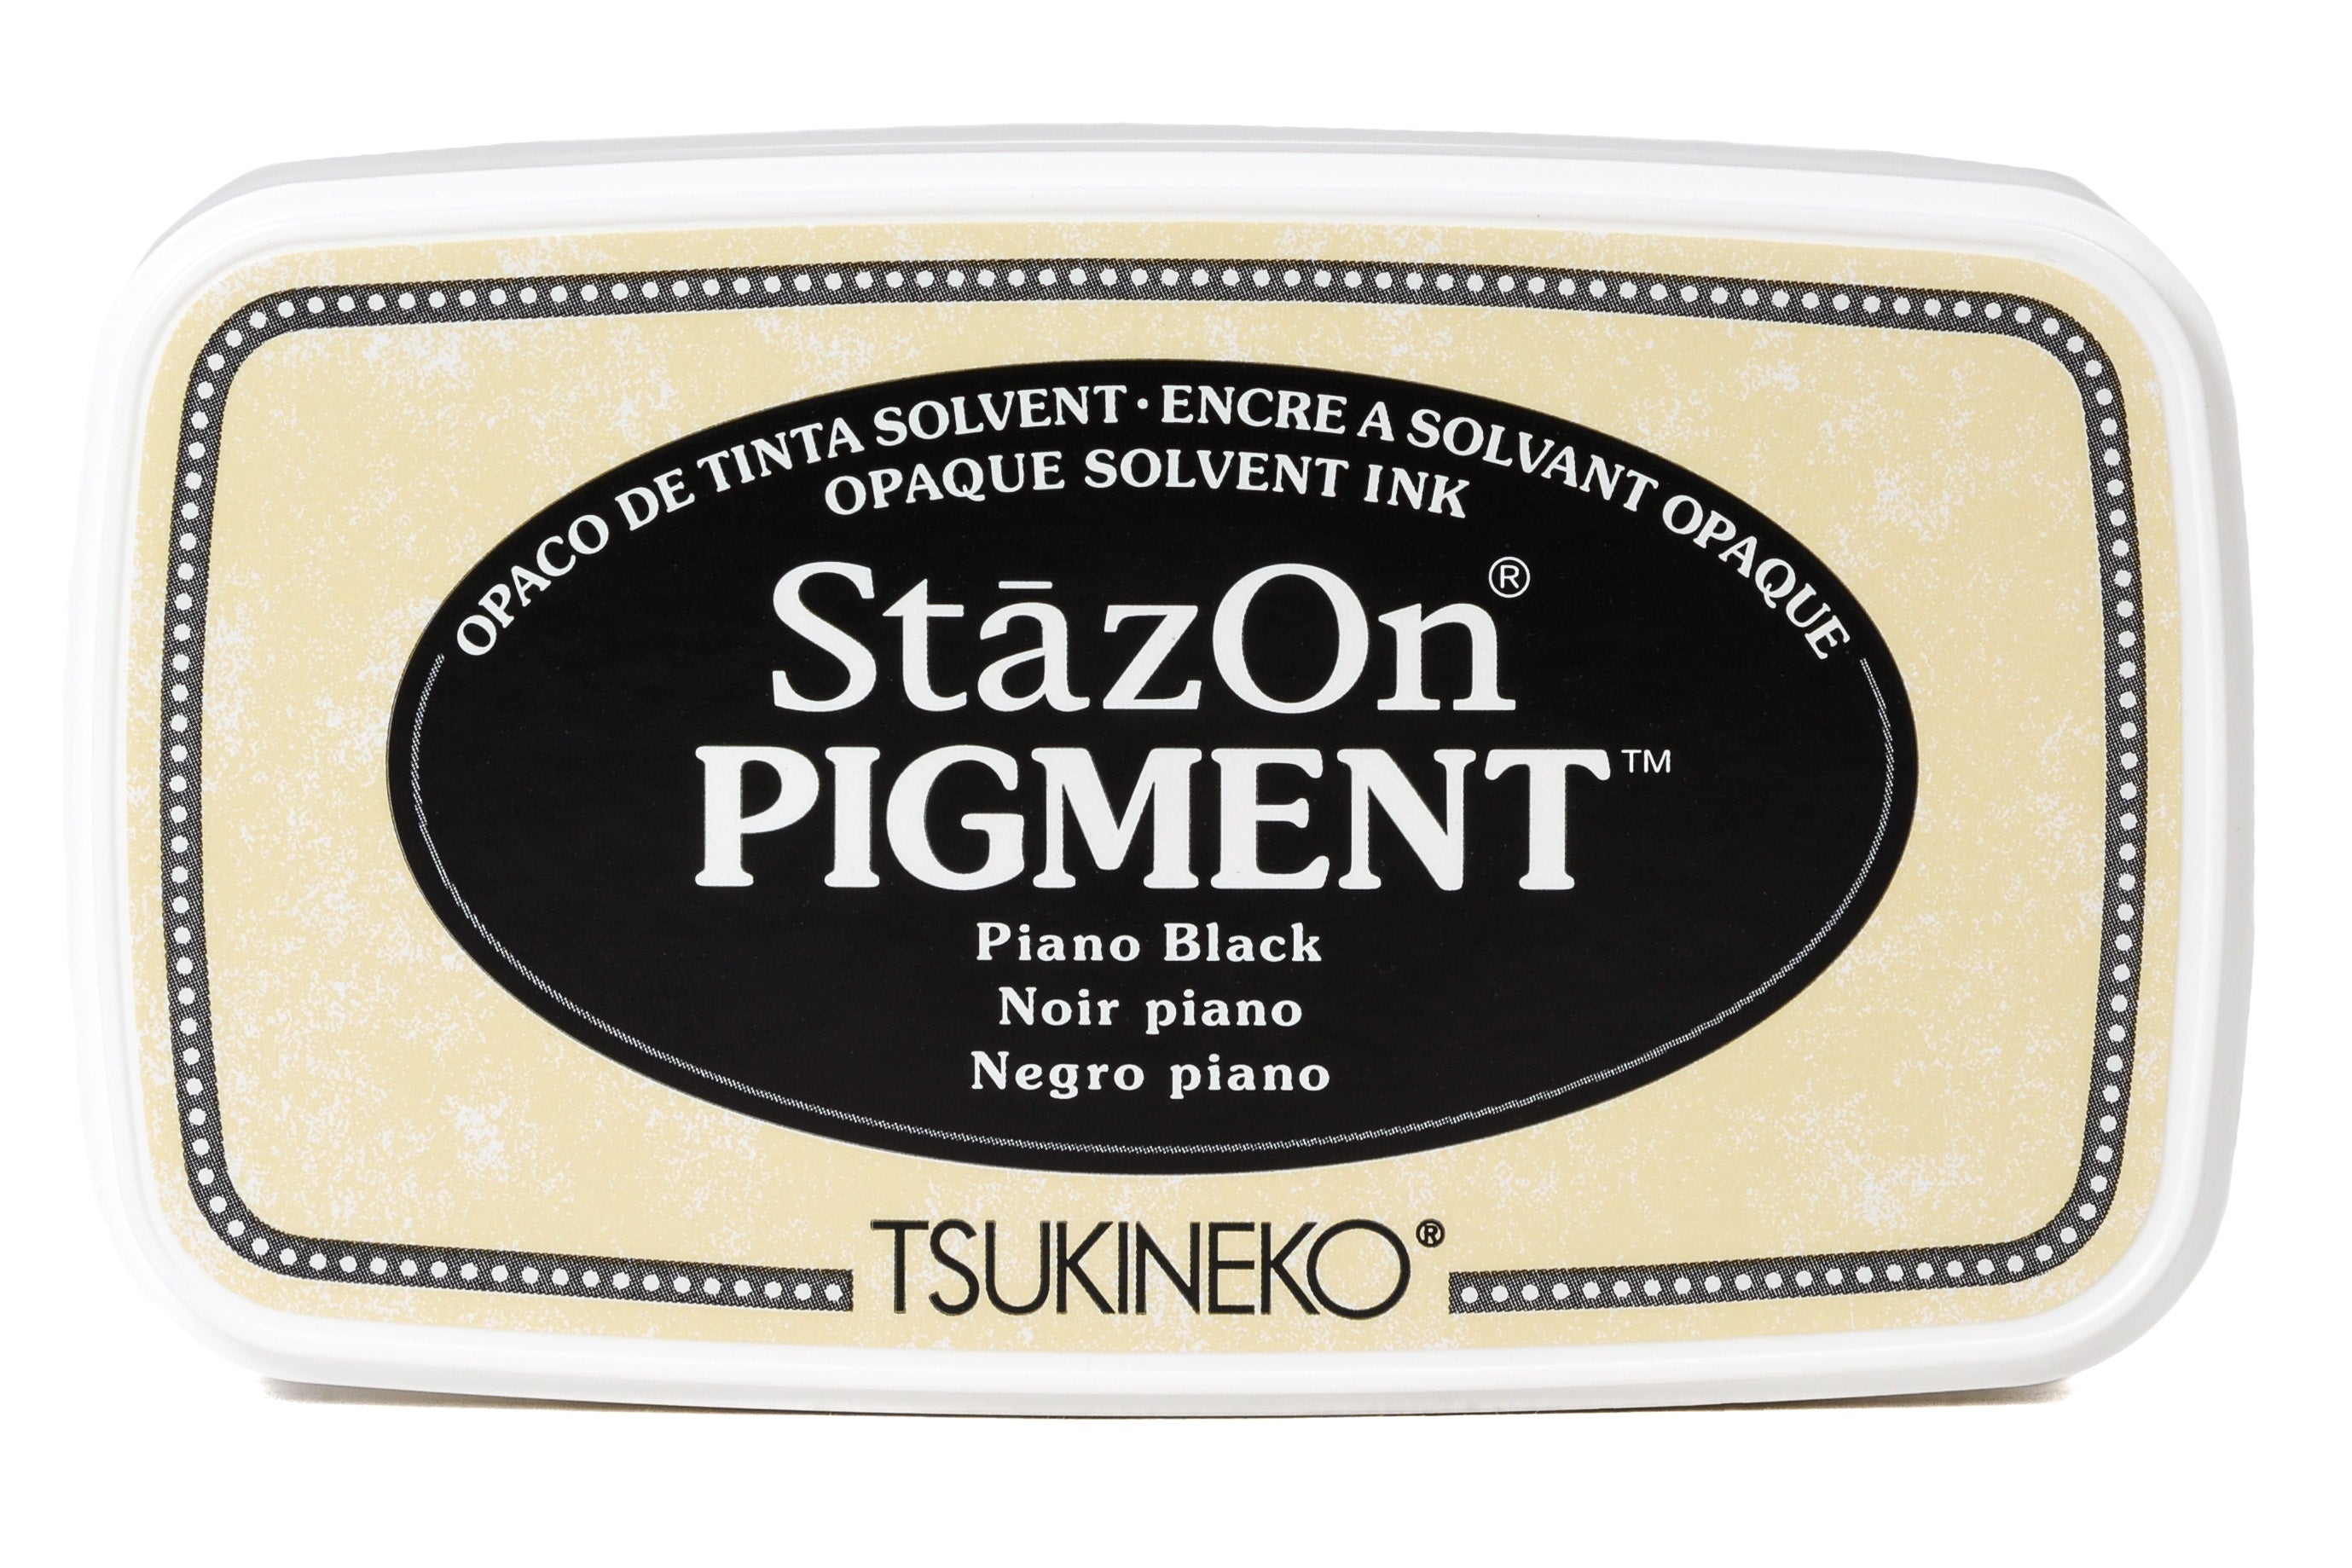 StazOn Multi-Surface Inkpad, pre-inked with Black Permanent Ink.